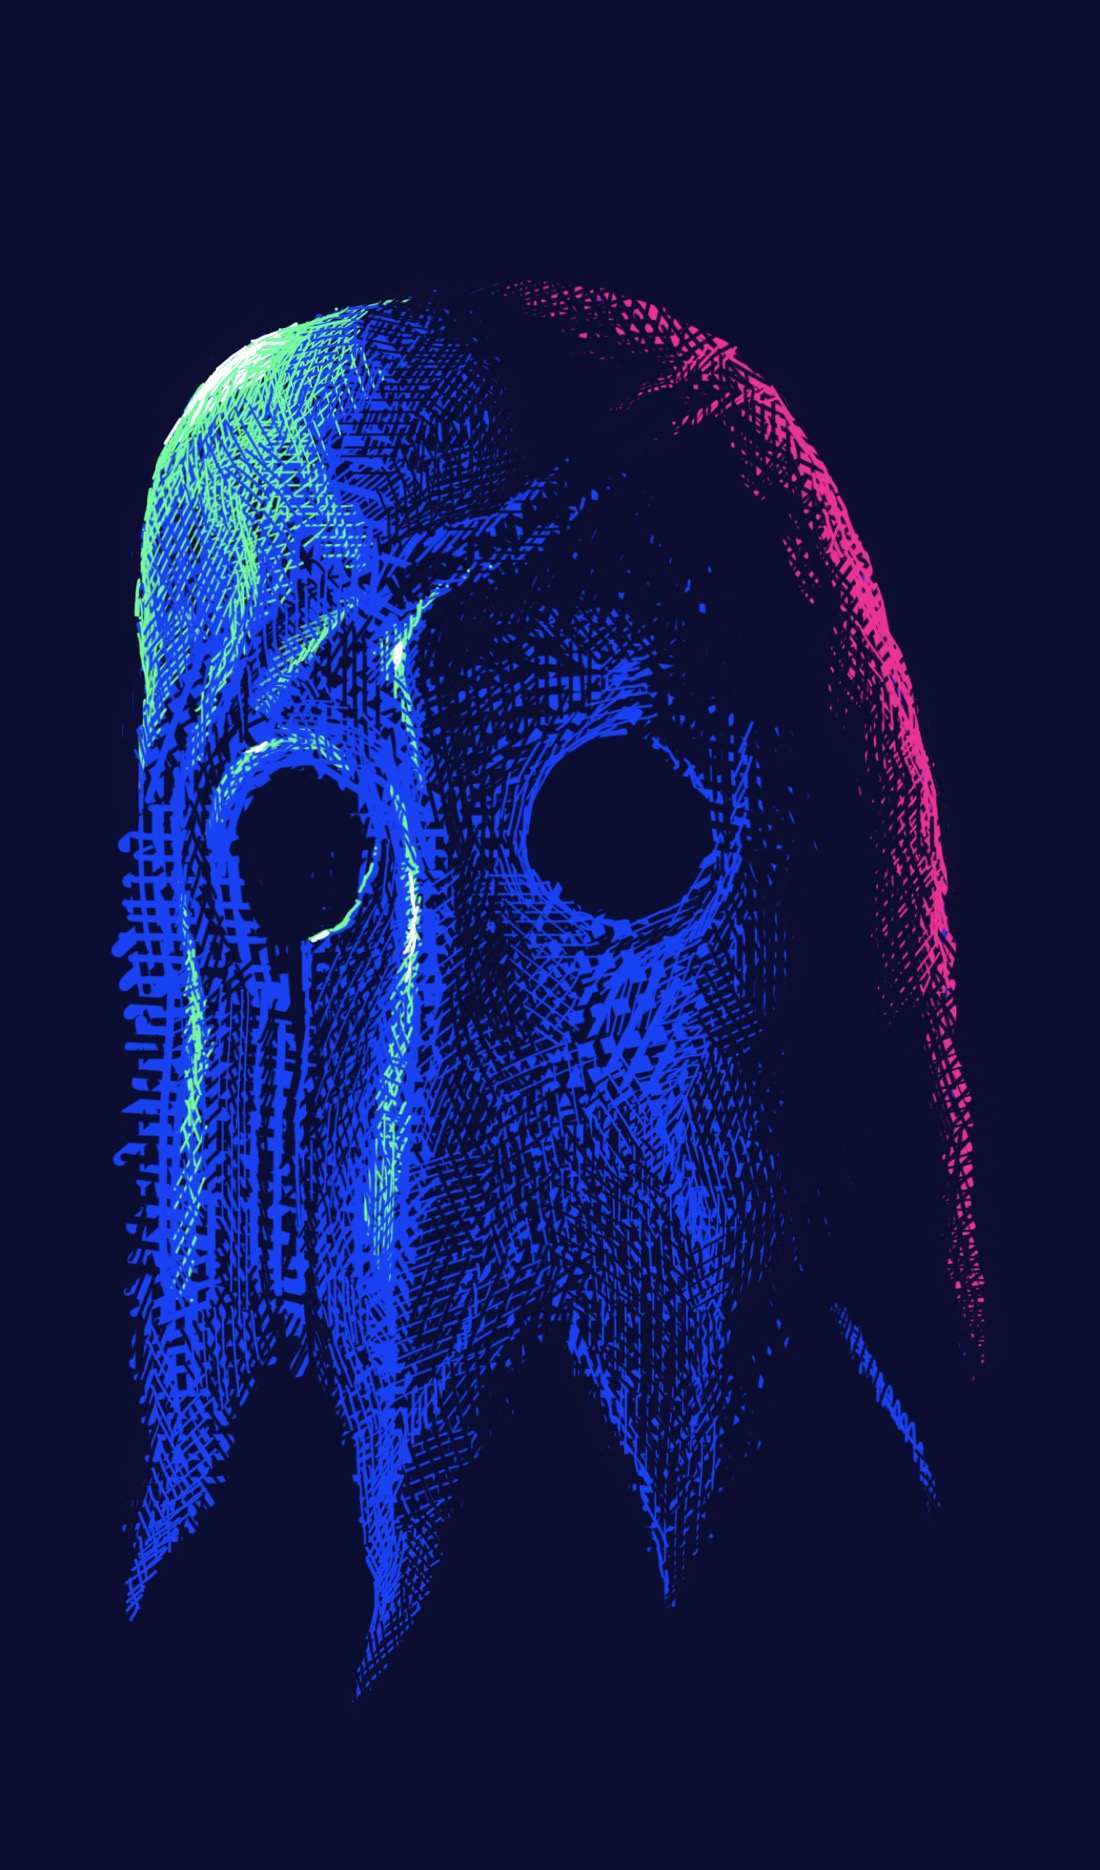 A black background. In the foreground is a blue, octopus-like creature with four short, triangular tentacles. The creature has empty eyes, and extending from the middle of the right eye downwards is a straight-edged seam that suggests this may be a mask or a costume. No one appears to be inside it. The creature is illuminated on two sides by a neon green light and a bright crimson light.